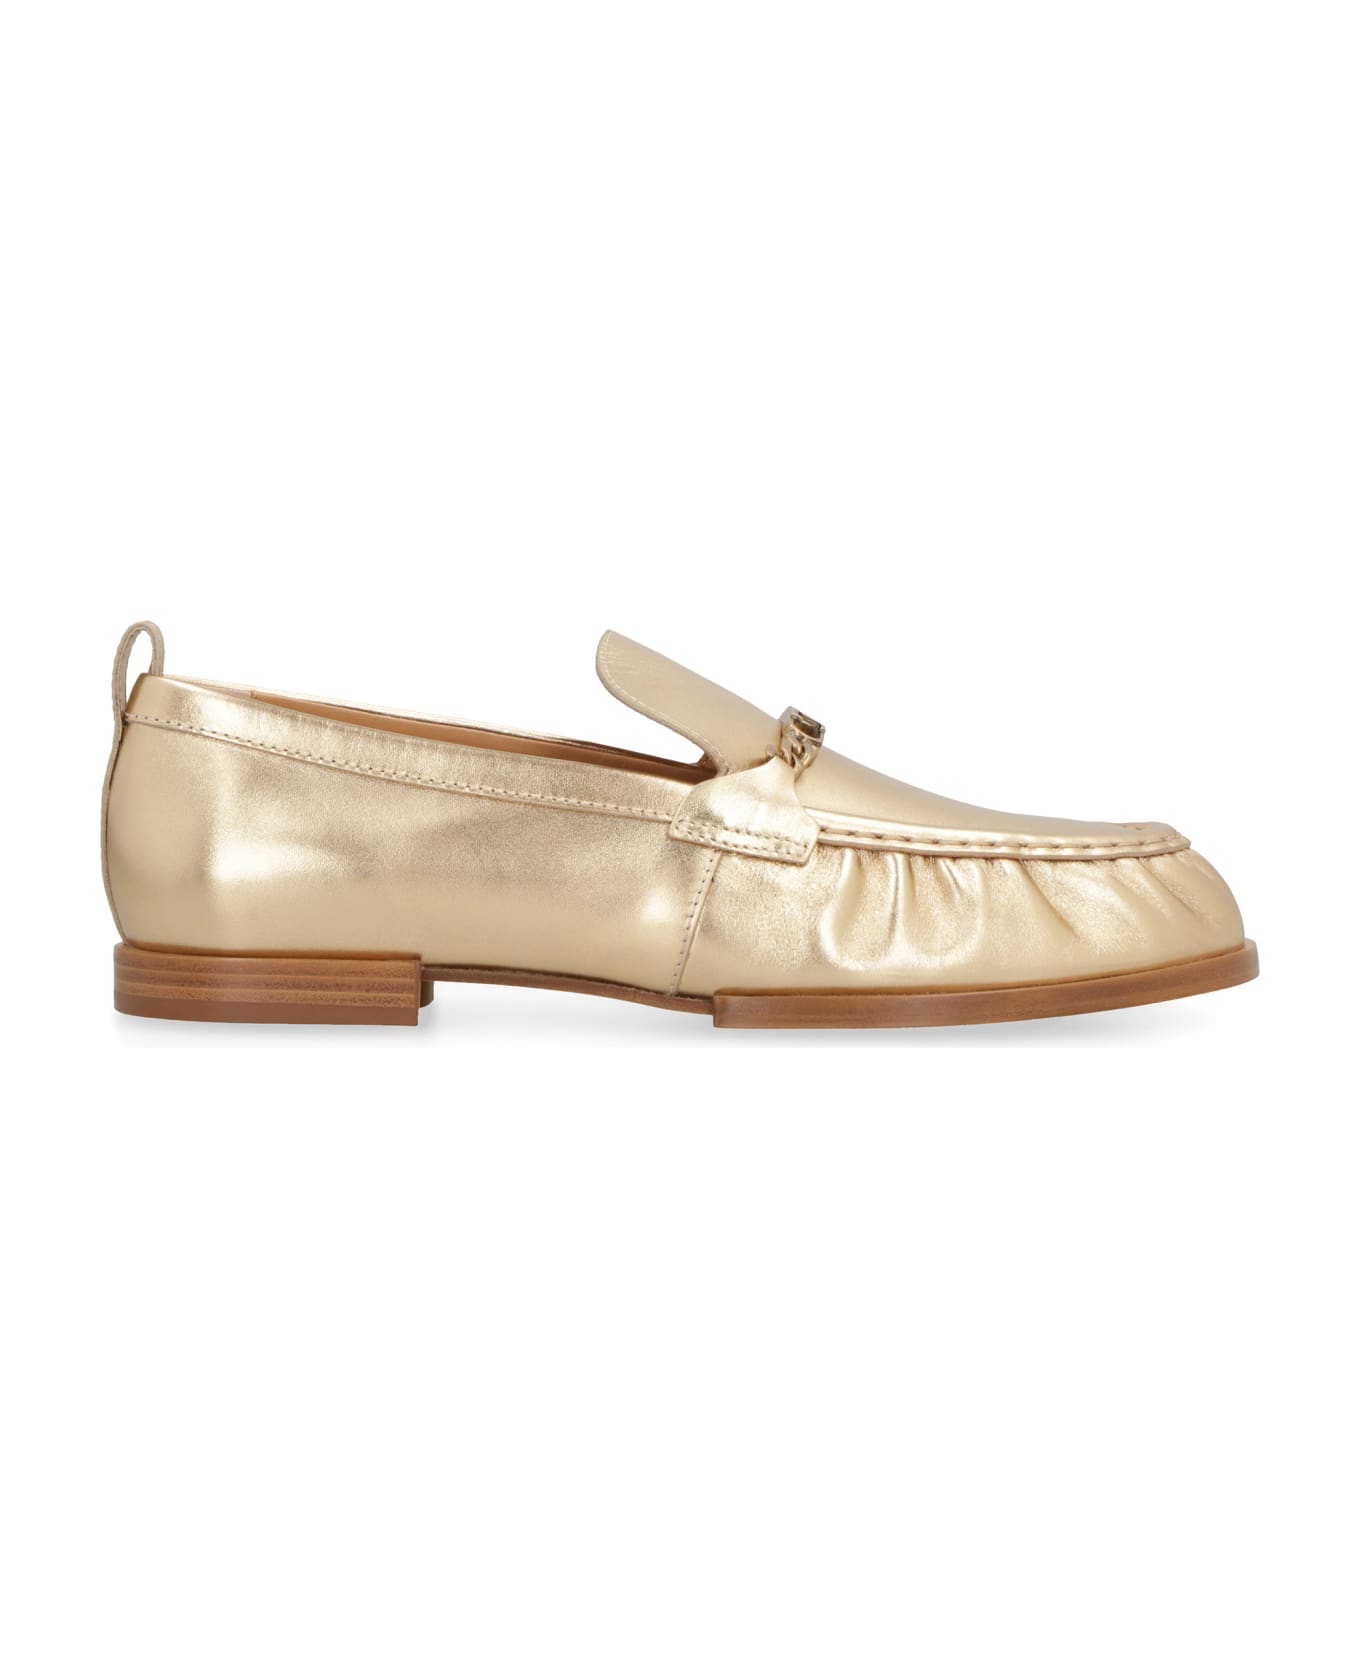 Tod's Metallic Leather Loafers - Gold フラットシューズ